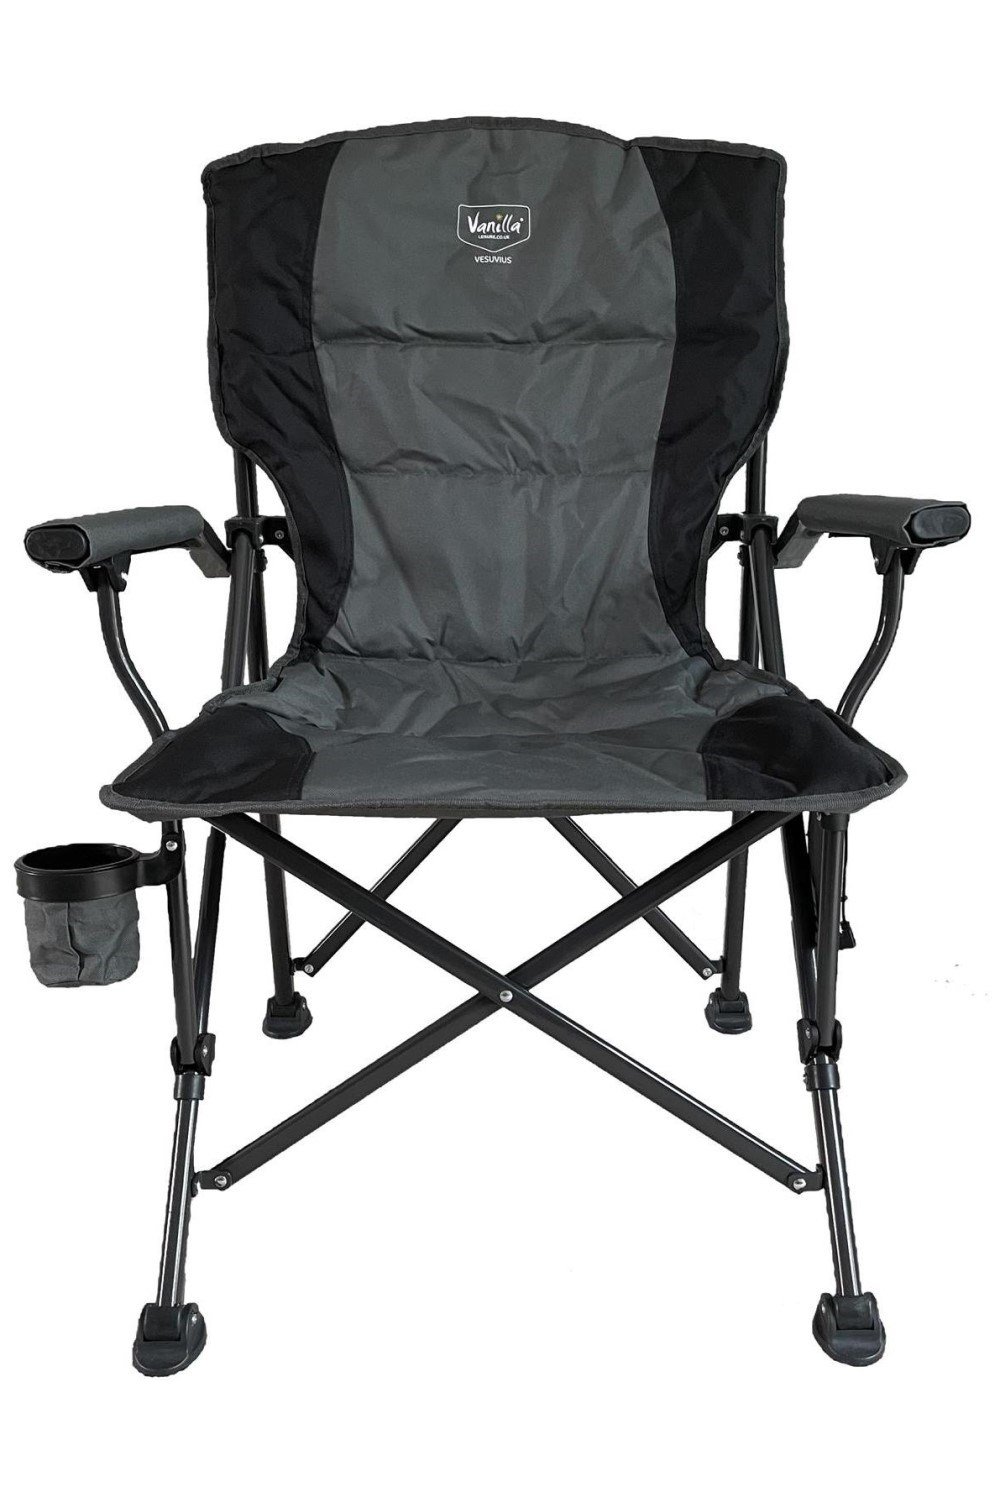 Vesuvius Folding Outdoor Heated Camping Chair -